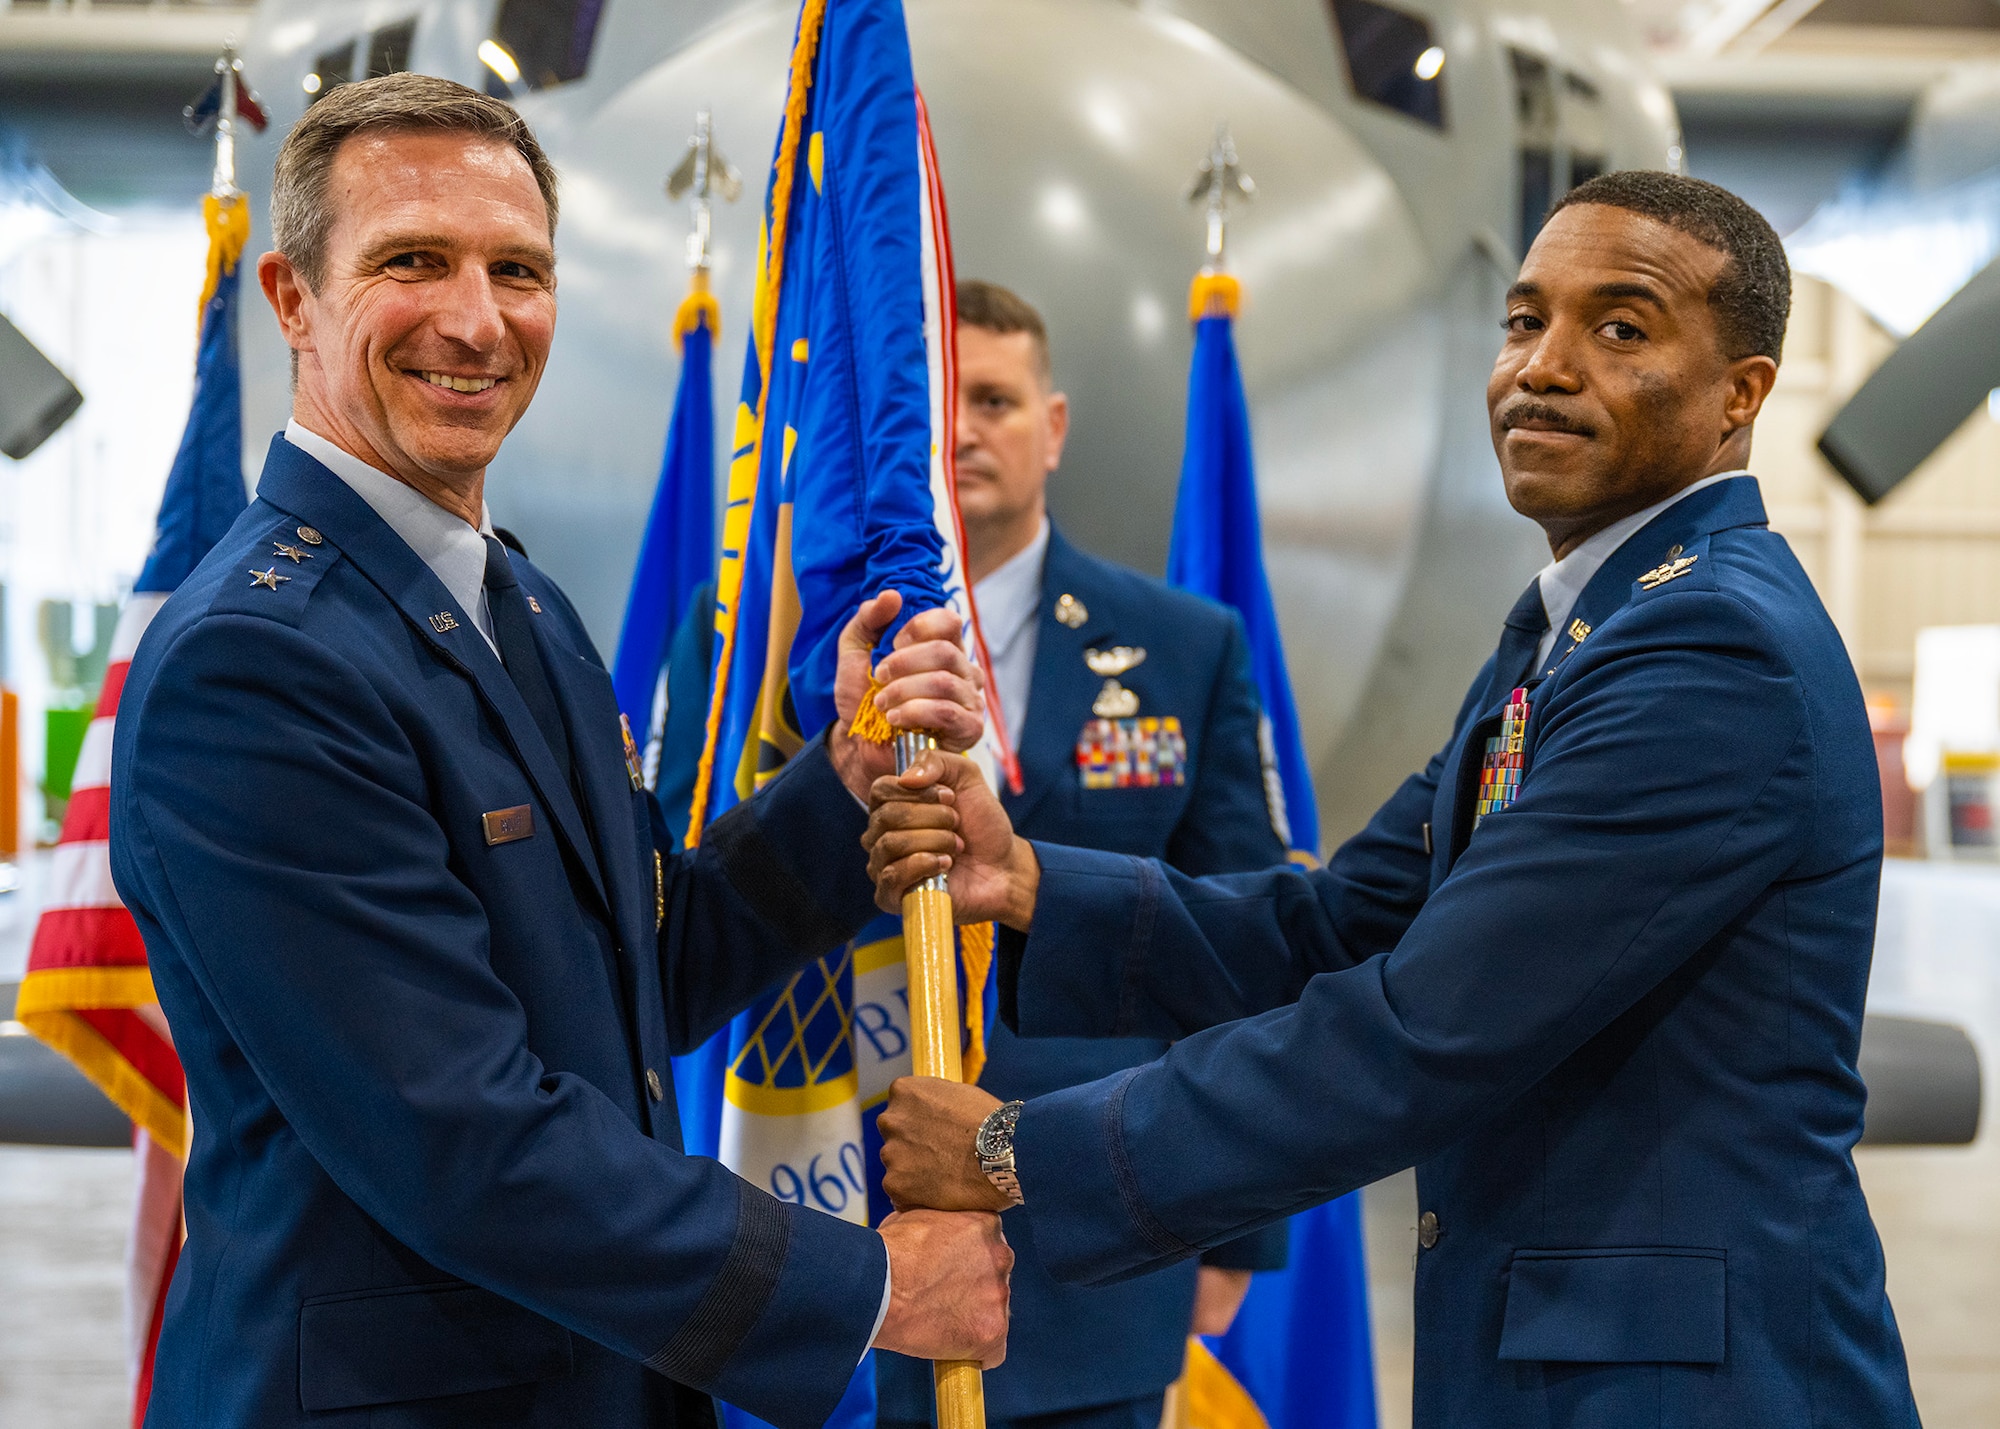 Col. Silas V. Darden receives the guidon from Maj. Gen. Bryan P. Radliff, 10th Air Force commander, after he assumes command from Col. Richard A. Erredge, 960th CW outgoing commander, during the 960th Cyberspace Wing change of command ceremony at Joint Base San Antonio-Lackland, Texas on May 7, 2023. (U.S. Air Force photo by Brian Boisvert)